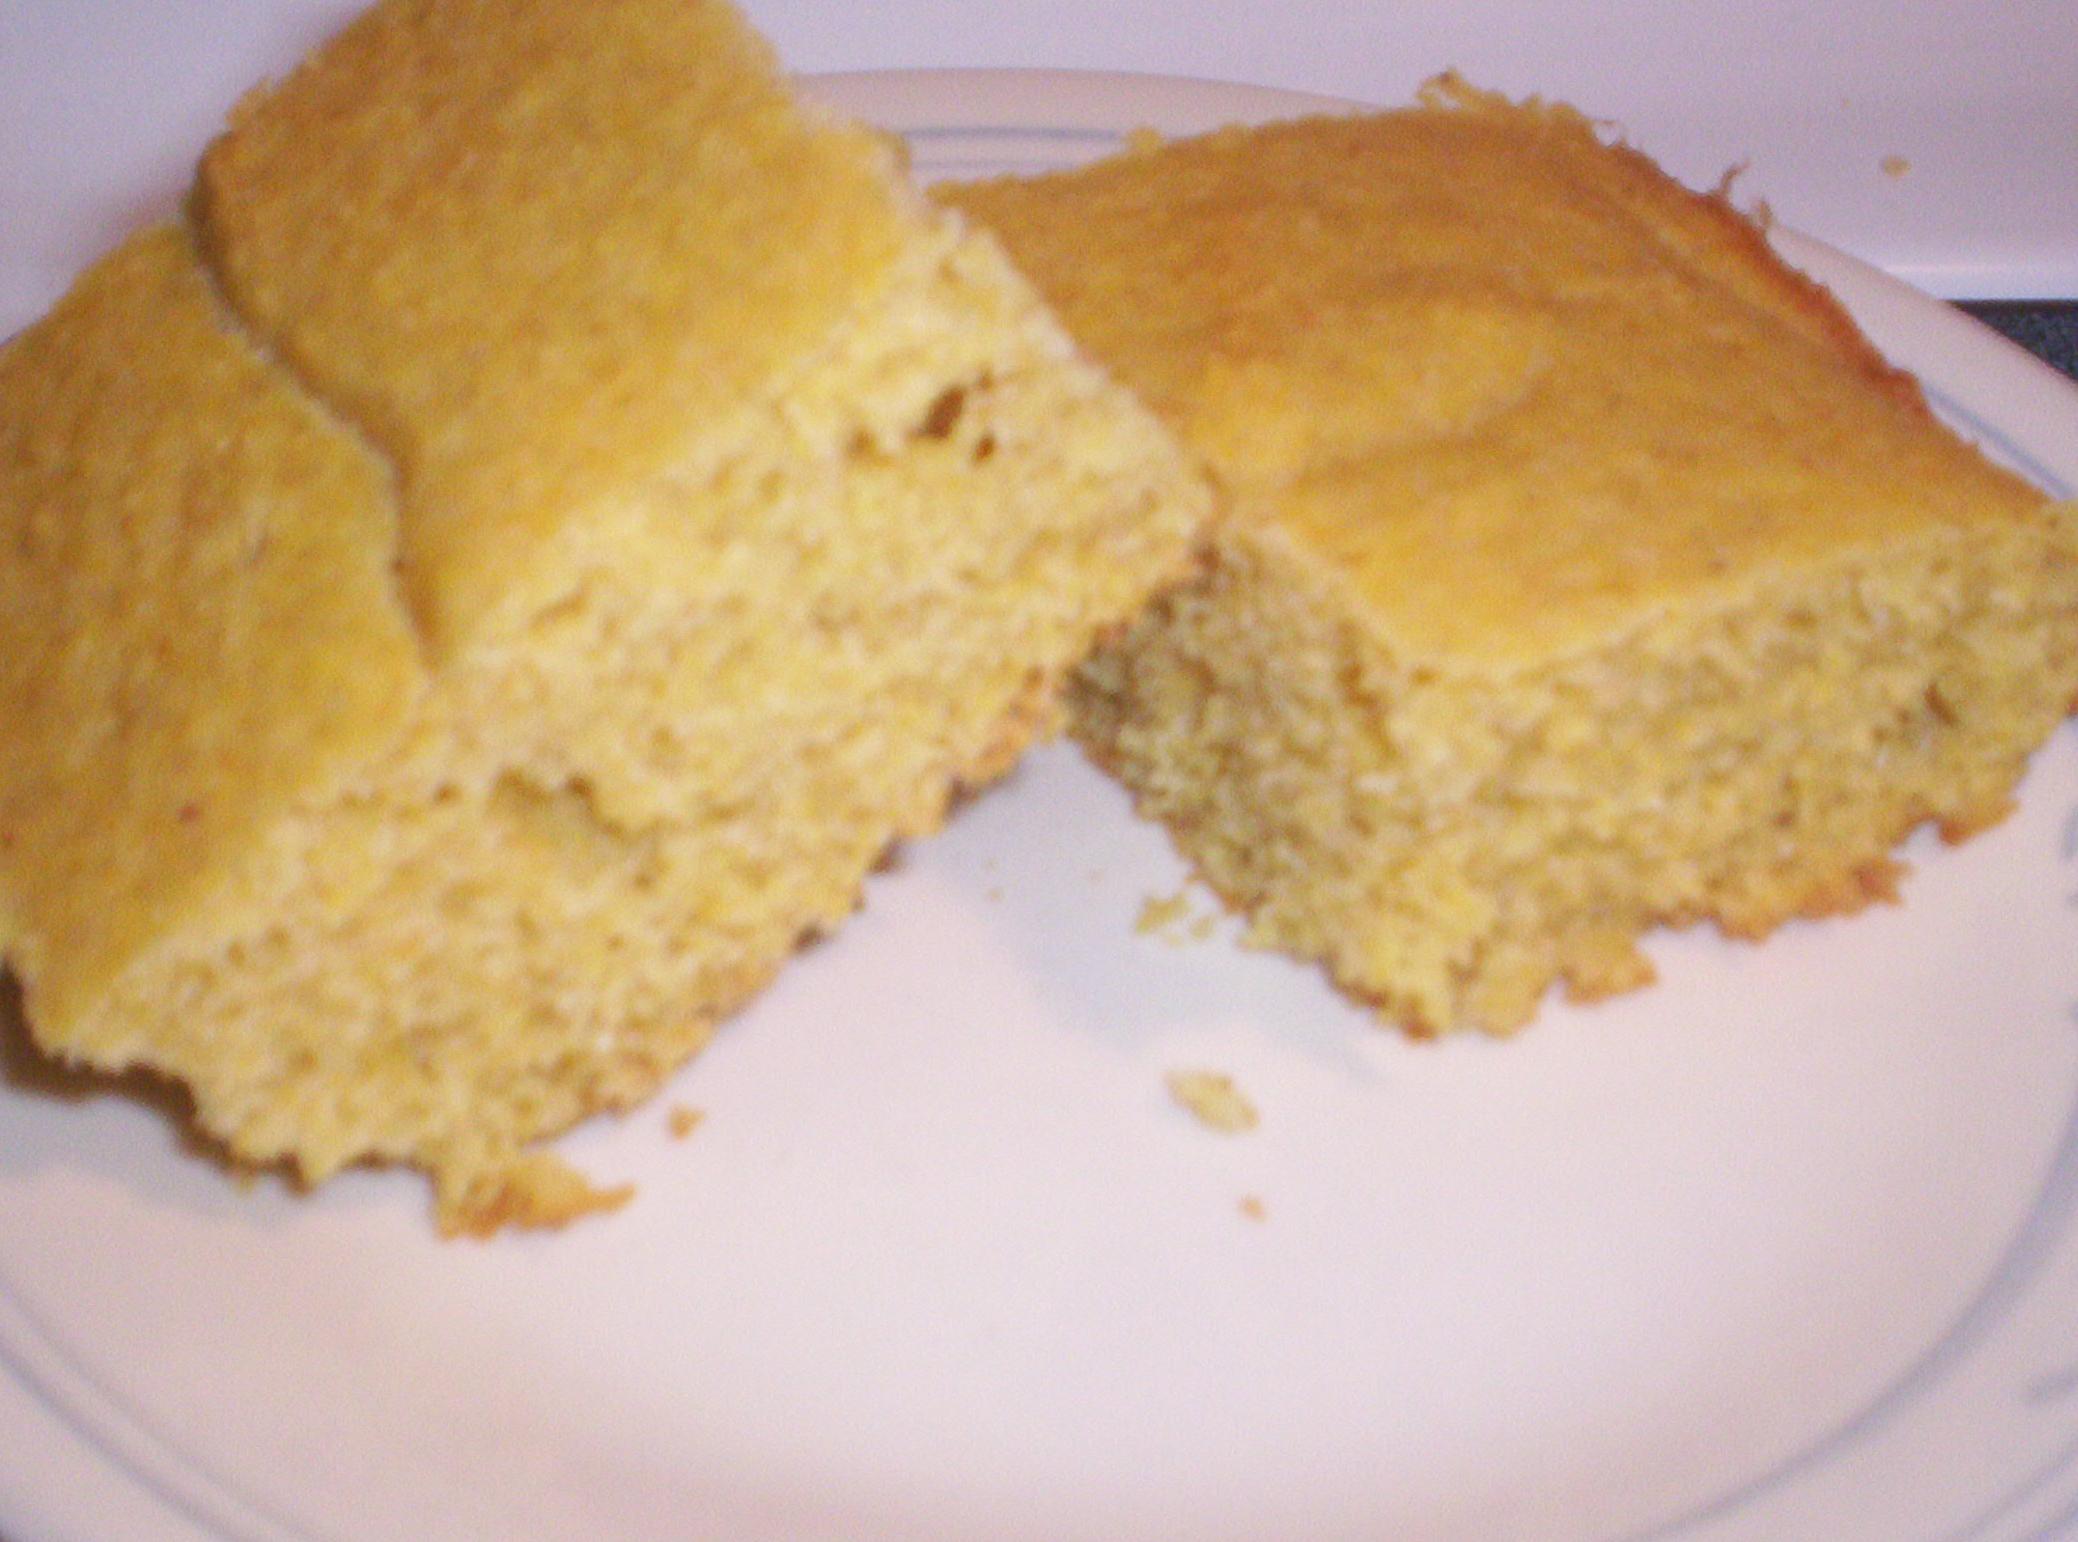  Add a pop of color to your plate with this vibrant gluten-free cornbread.